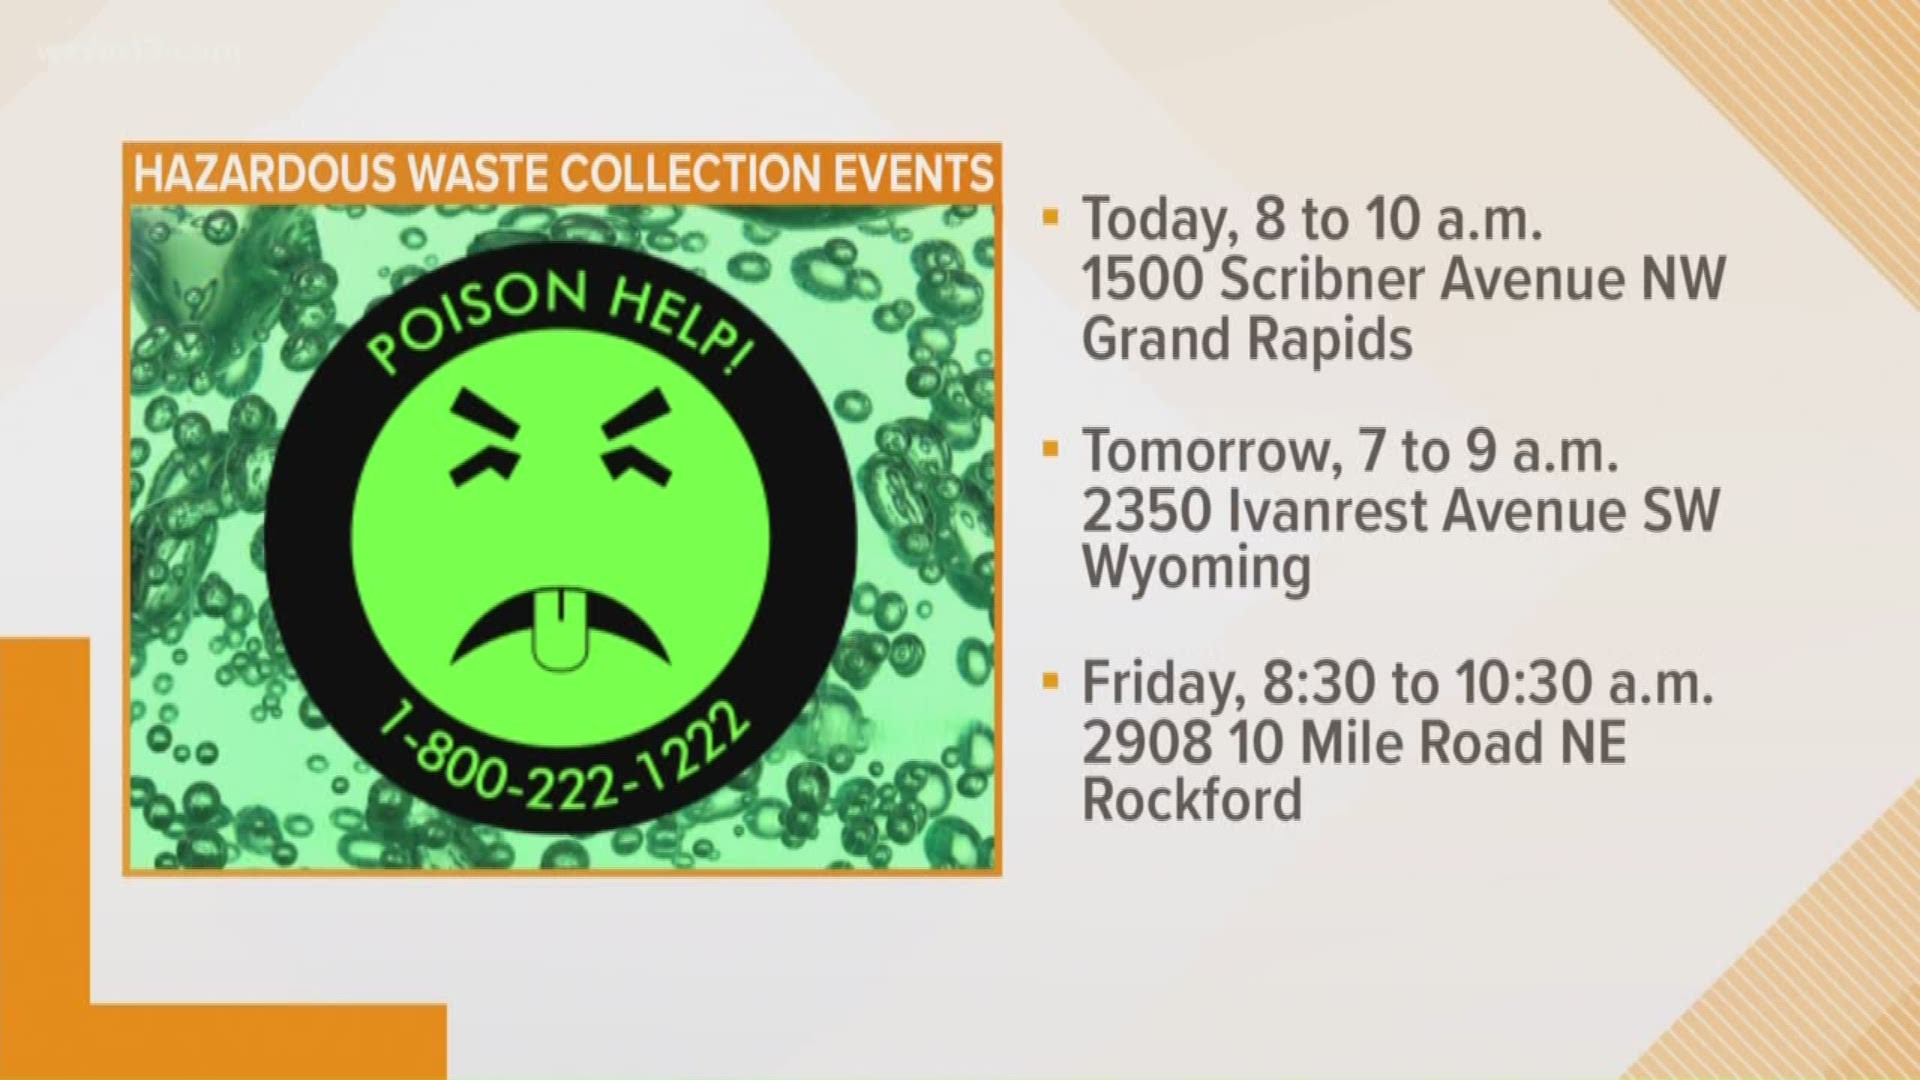 Leaders are hosting hazardous waste collection events around Kent County the next few days.